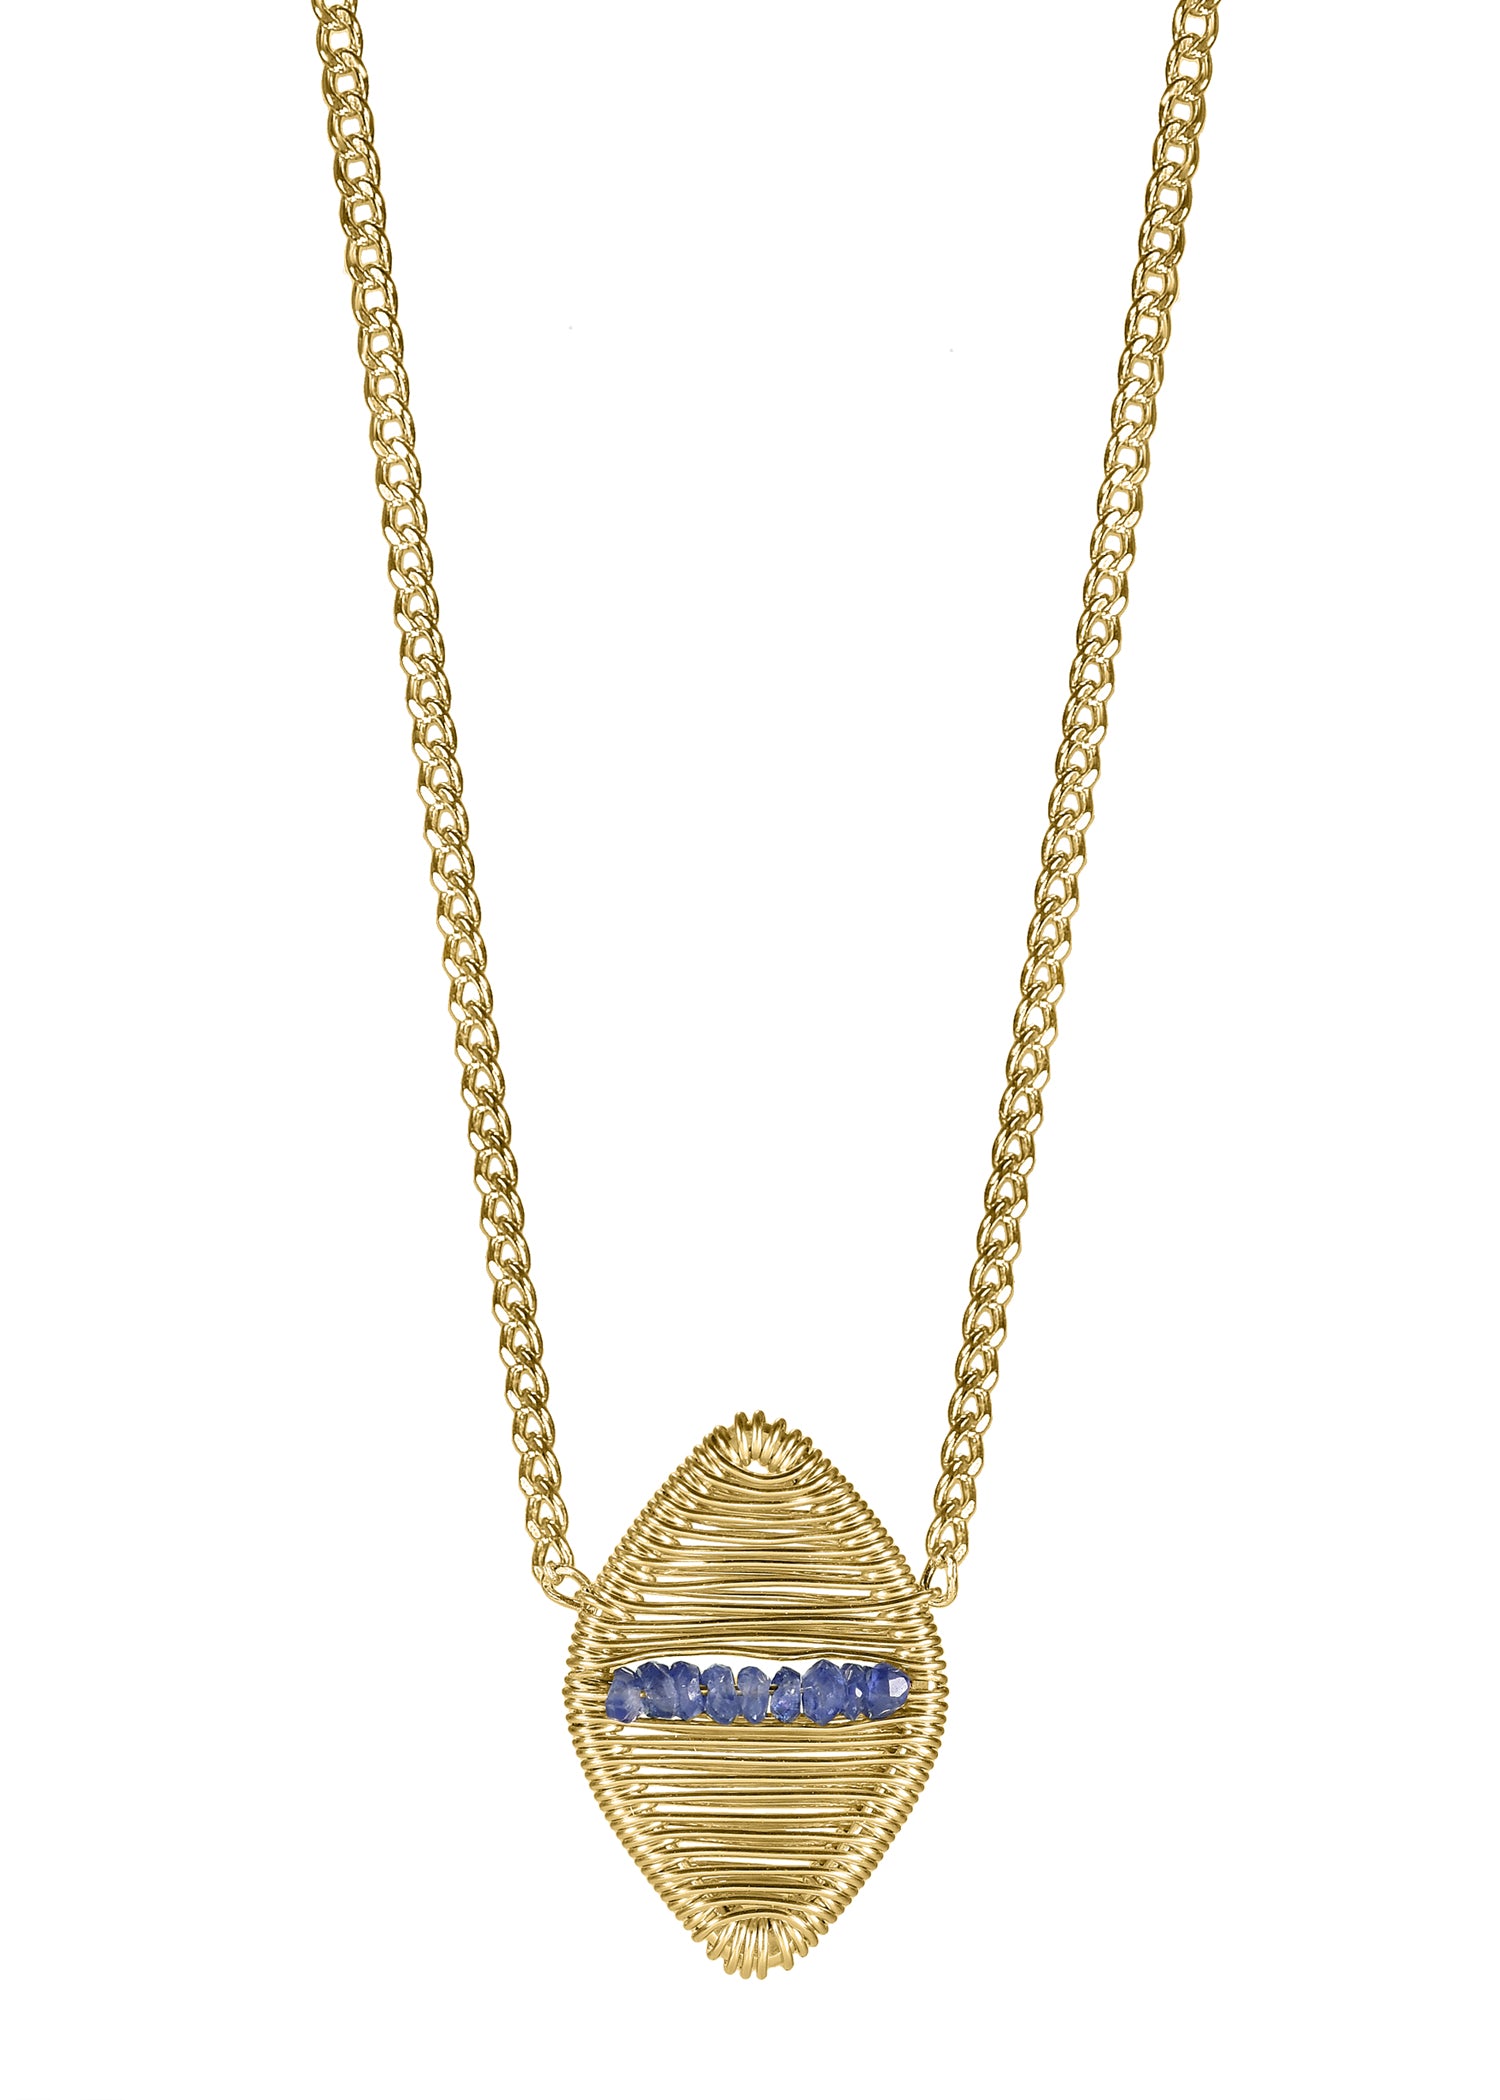 Blue sapphire 14k gold fill Necklace measures 16" in length Pendant measures 5/8" in length and 3/8" in width at the widest point Handmade in our Los Angeles studio